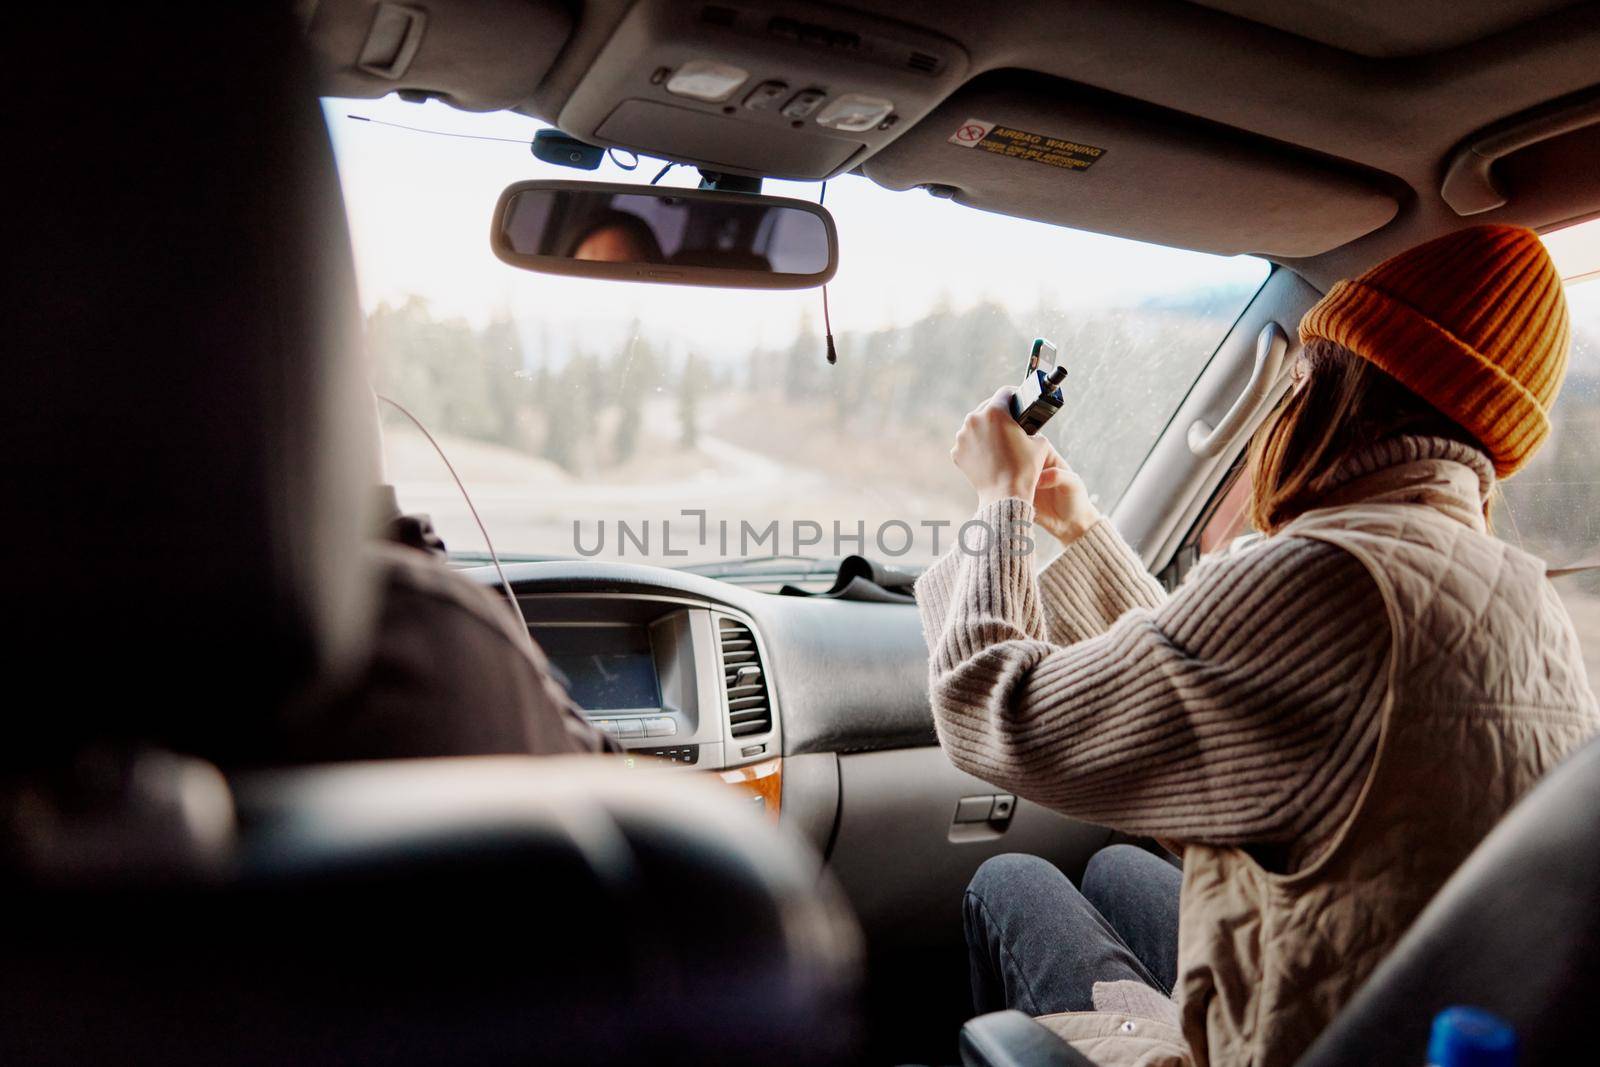 woman in a hat with a phone in her hands shoots a video of nature in a car. High quality photo